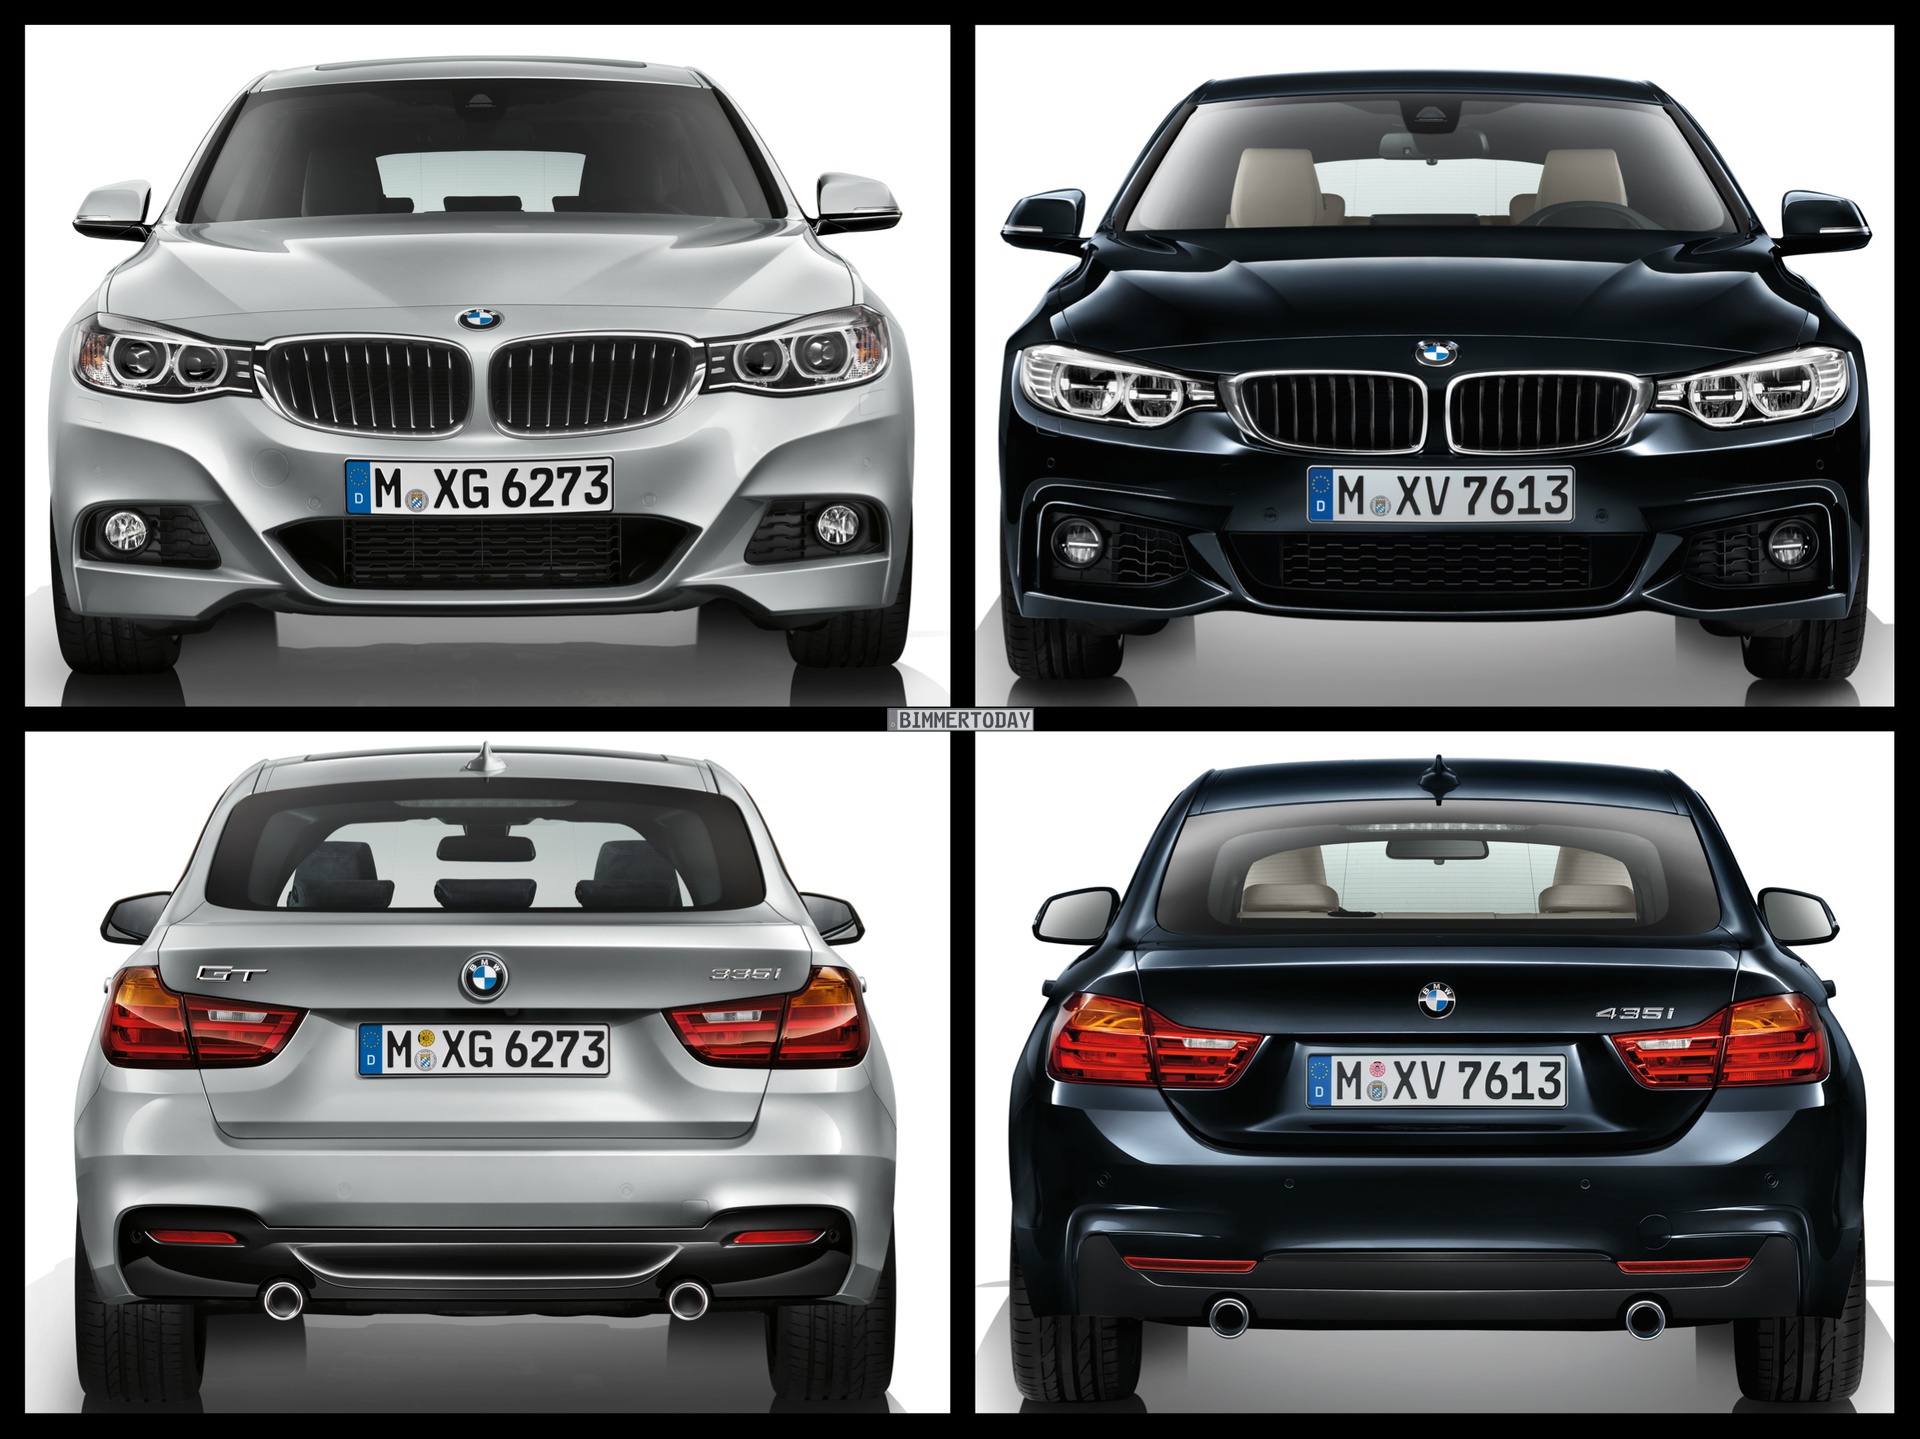 Editorial: Should I Buy The BMW 4 Series Gran Coupe or 3 Series Gran Turismo?